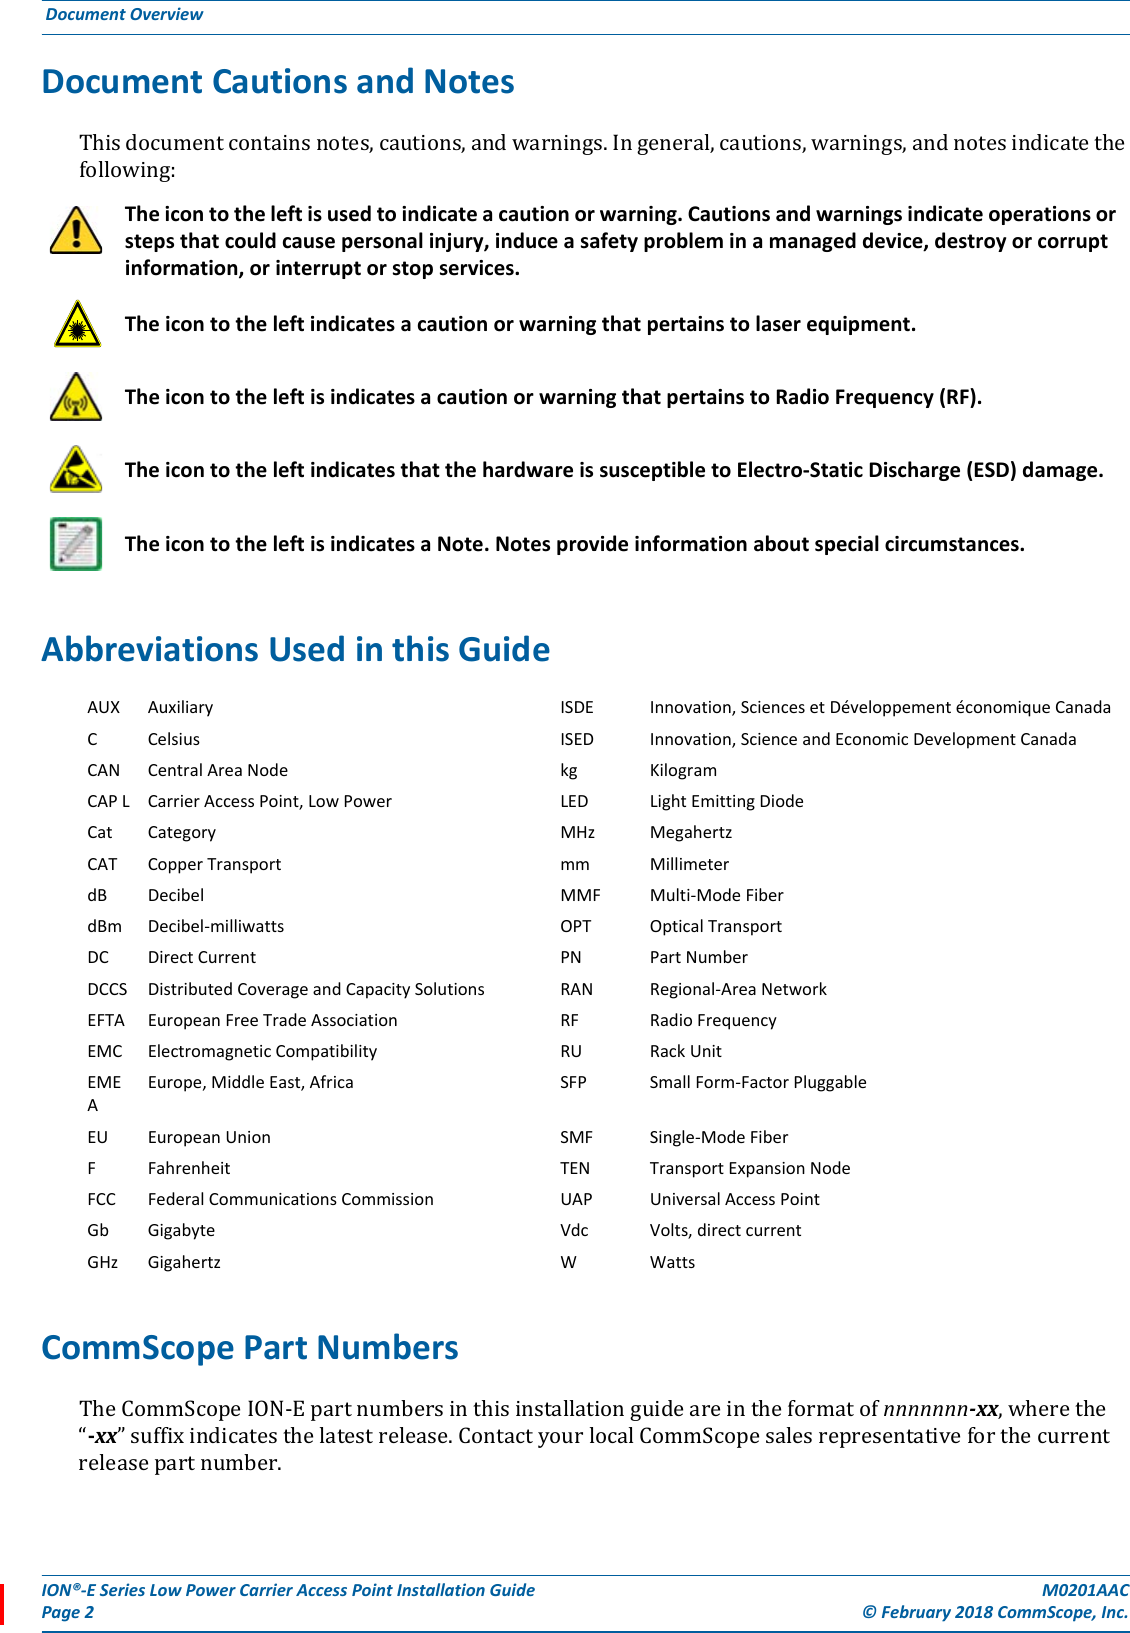 ION®-E Series Low Power Carrier Access Point Installation Guide M0201AACPage 2 © February 2018 CommScope, Inc. Document Overview  Document Cautions and NotesThisdocumentcontainsnotes,cautions,andwarnings.Ingeneral,cautions,warnings,andnotesindicatethefollowing:Abbreviations Used in this GuideCommScope Part NumbersTheCommScopeION-Epartnumbersinthisinstallationguideareintheformatofnnnnnnn-xx,wherethe“-xx”suffixindicatesthelatestrelease.ContactyourlocalCommScopesalesrepresentativeforthecurrentreleasepartnumber.The icon to the left is used to indicate a caution or warning. Cautions and warnings indicate operations or steps that could cause personal injury, induce a safety problem in a managed device, destroy or corrupt information, or interrupt or stop services. The icon to the left indicates a caution or warning that pertains to laser equipment.The icon to the left is indicates a caution or warning that pertains to Radio Frequency (RF).The icon to the left indicates that the hardware is susceptible to Electro-Static Discharge (ESD) damage.The icon to the left is indicates a Note. Notes provide information about special circumstances.AUX Auxiliary ISDE Innovation, Sciences et Développement économique CanadaCCelsius ISED Innovation, Science and Economic Development CanadaCAN Central Area Node kg KilogramCAP L Carrier Access Point, Low Power LED Light Emitting DiodeCat Category MHz MegahertzCAT Copper Transport mm MillimeterdB Decibel MMF Multi-Mode FiberdBm Decibel-milliwatts OPT Optical Transport DC Direct Current PN Part NumberDCCS Distributed Coverage and Capacity Solutions RAN Regional-Area NetworkEFTA European Free Trade Association RF Radio FrequencyEMC Electromagnetic Compatibility RU Rack UnitEMEAEurope, Middle East, Africa SFP Small Form-Factor PluggableEU European Union SMF Single-Mode Fiber FFahrenheit TEN Transport Expansion NodeFCC Federal Communications Commission UAP Universal Access PointGb Gigabyte Vdc Volts, direct currentGHz Gigahertz WWatts